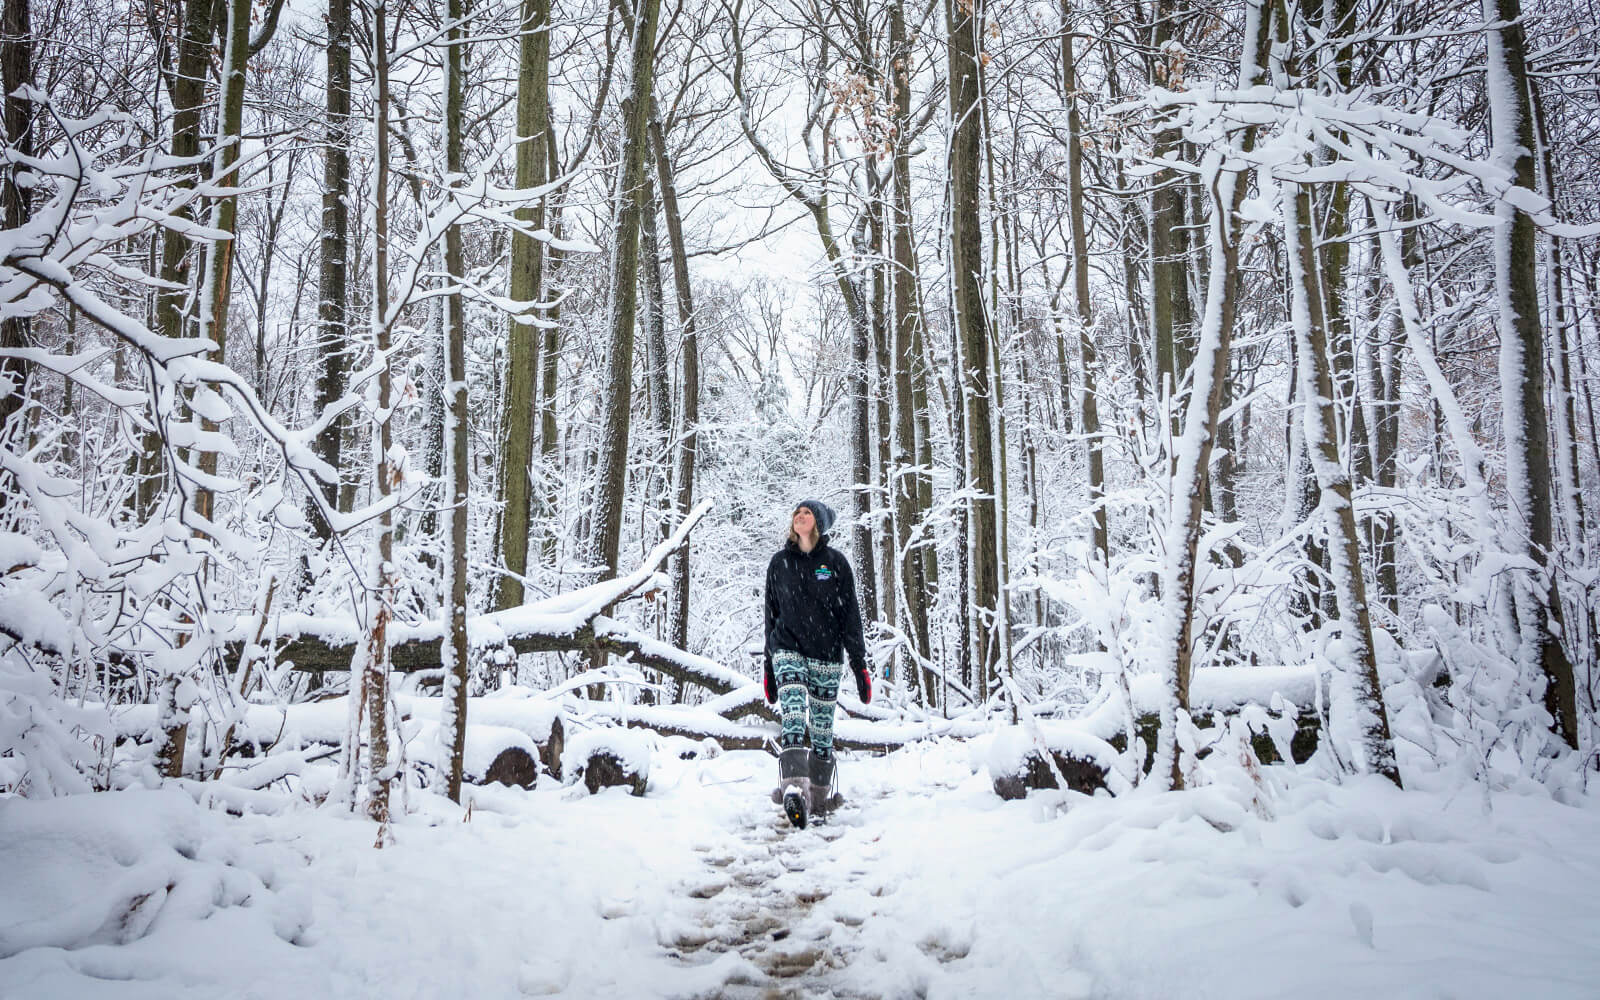 Winter Hiking Gear: 10 Things to Wear When Hitting the Trails » I